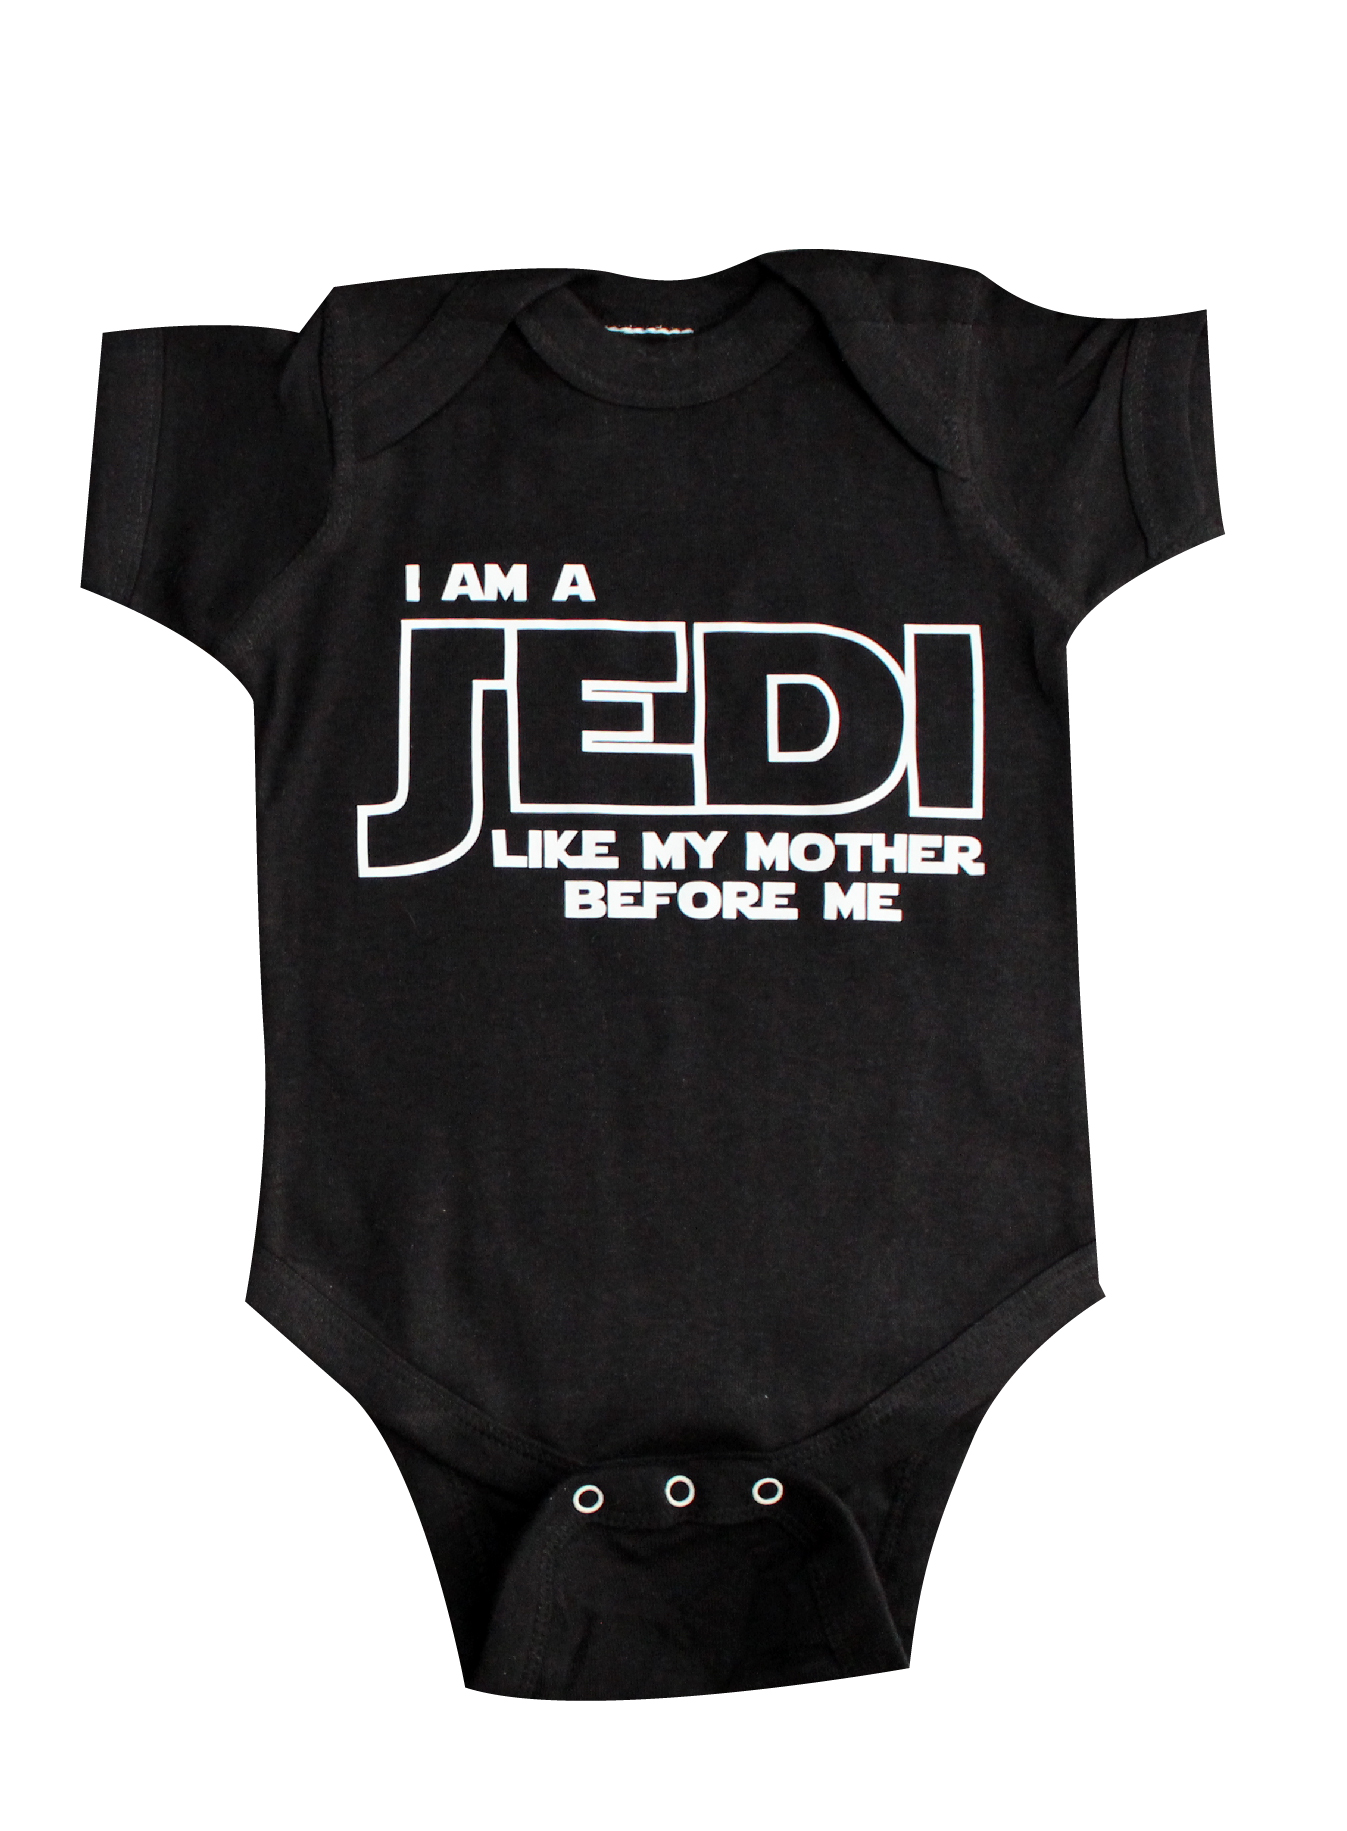 I am a Jedi like my Mother before me star wars onesie - Shop Online